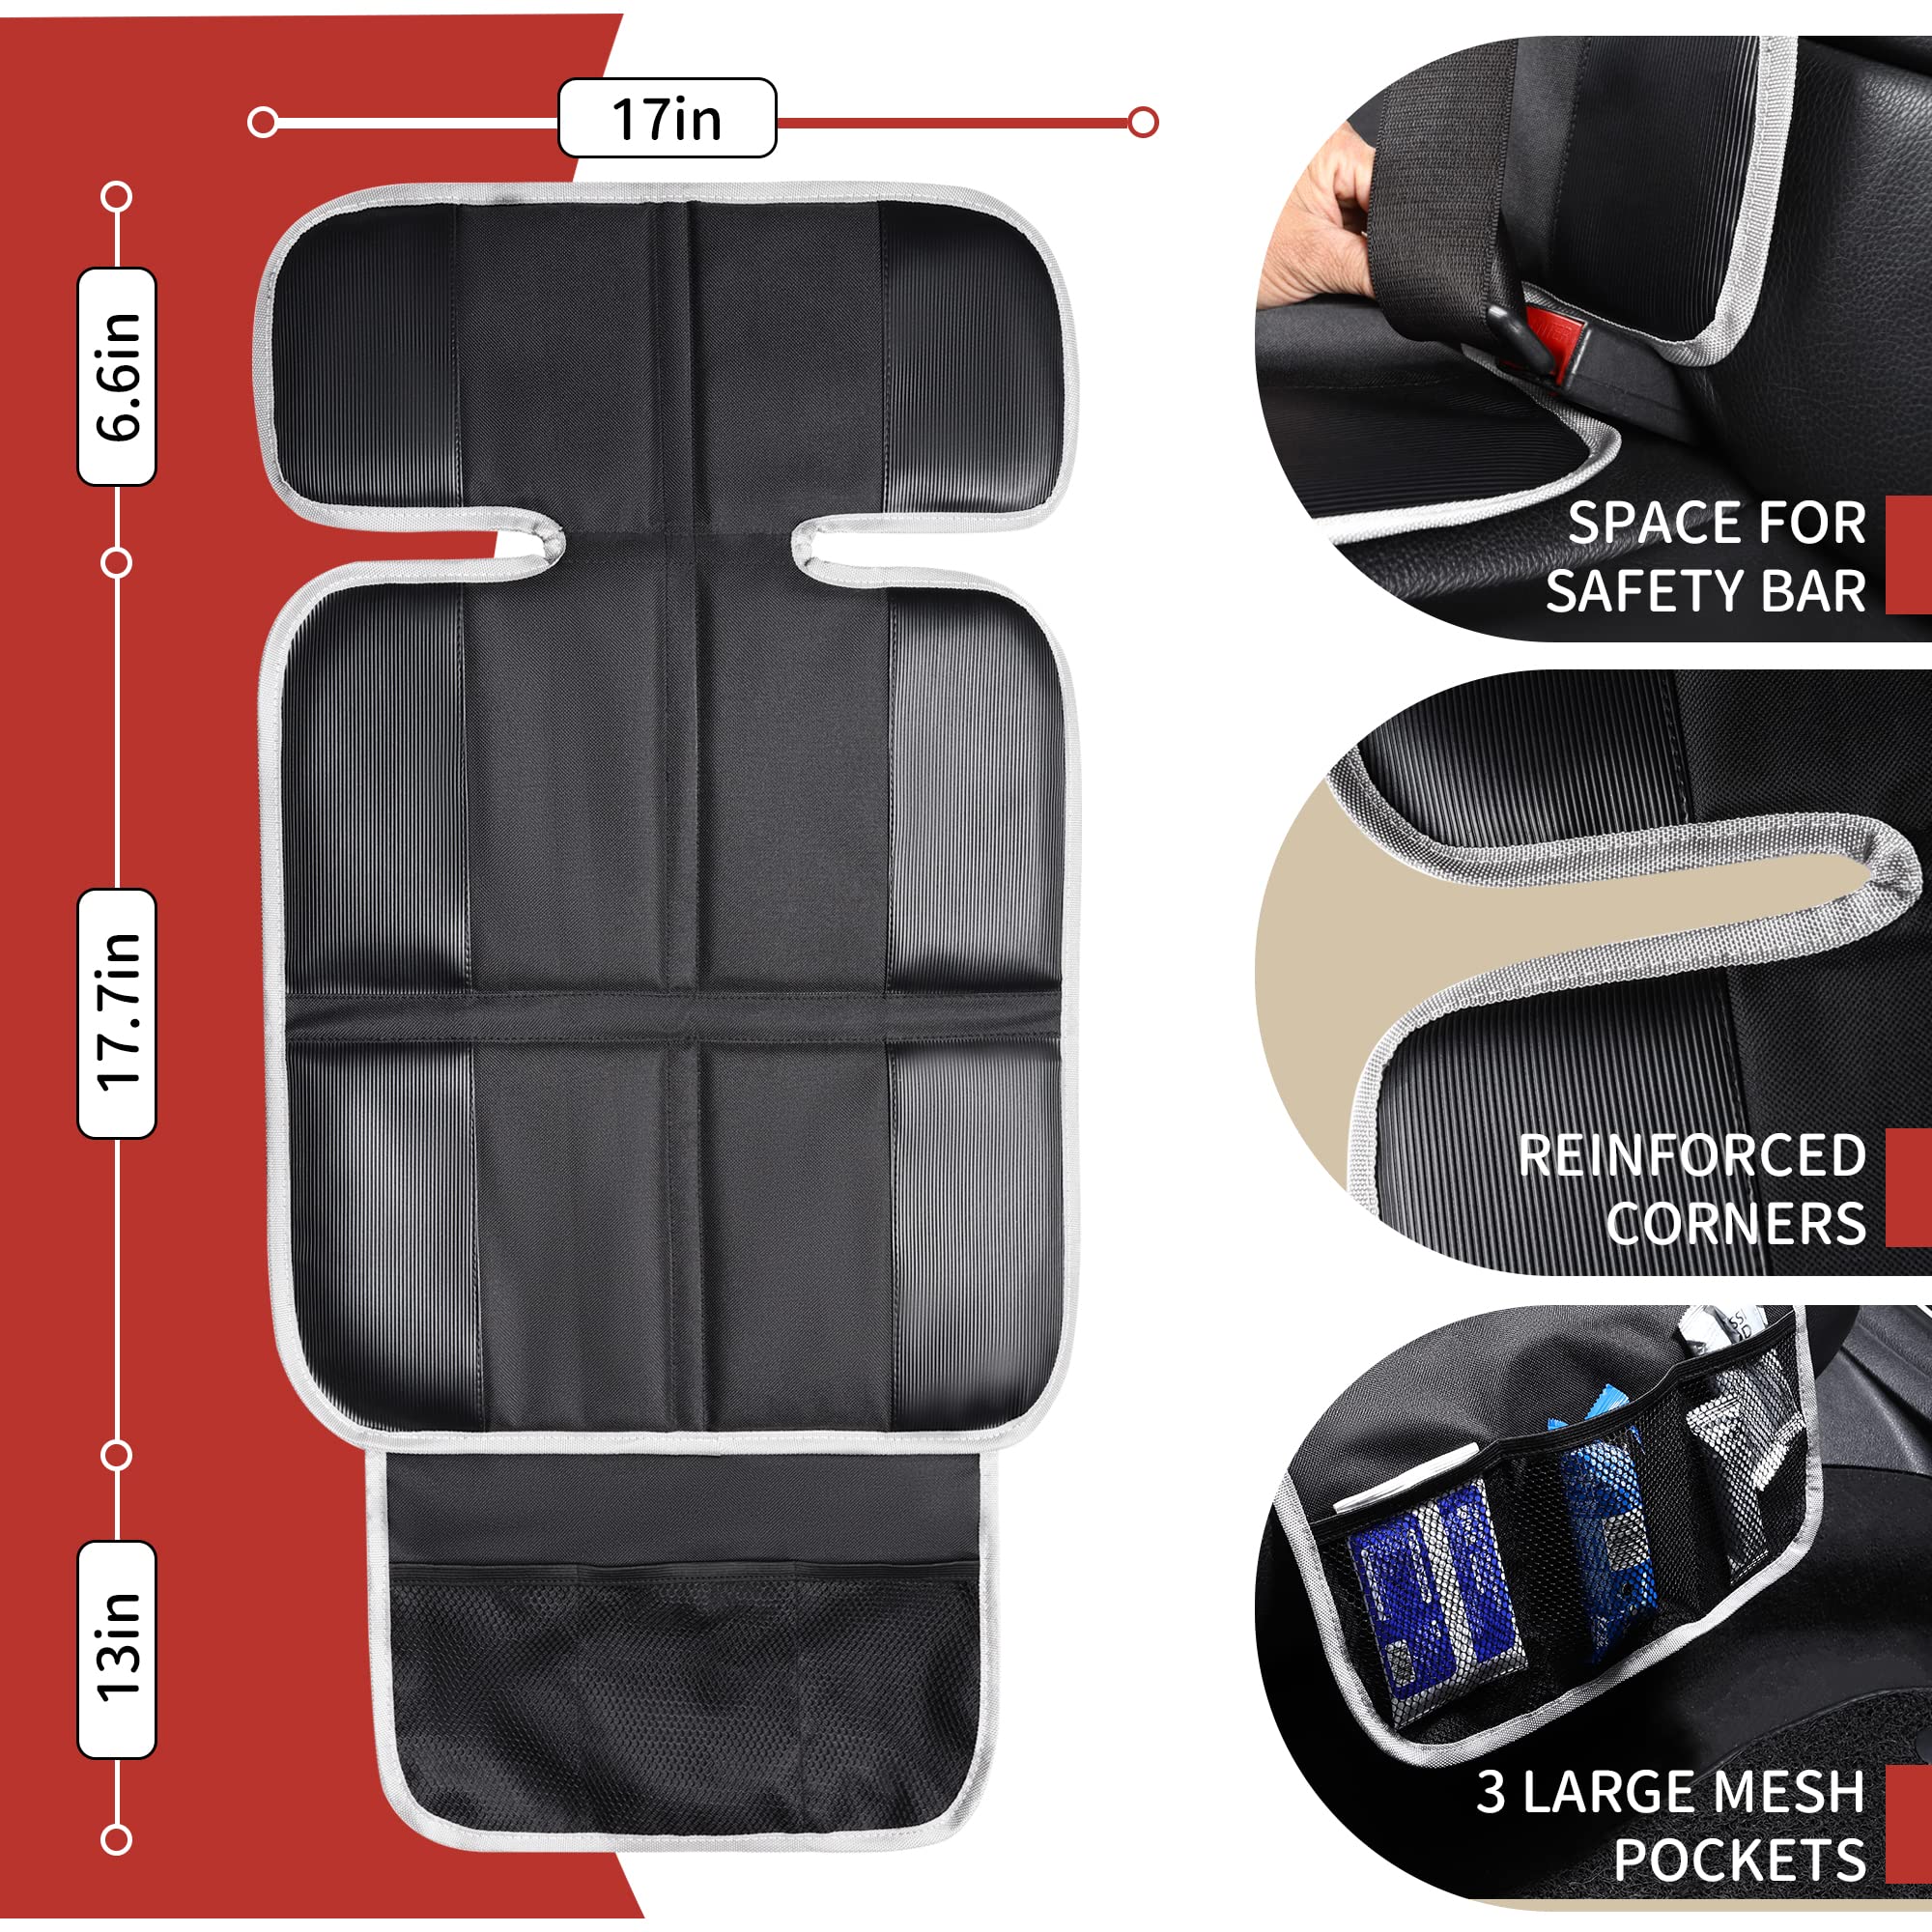 Car Seat Protector for Child Car Seat, Non-Slip Waterproof Car Seat Protector for Leather Seats with Thick Padding and Mesh Storage Pockets, Baby Seat Protectors Under Carseat